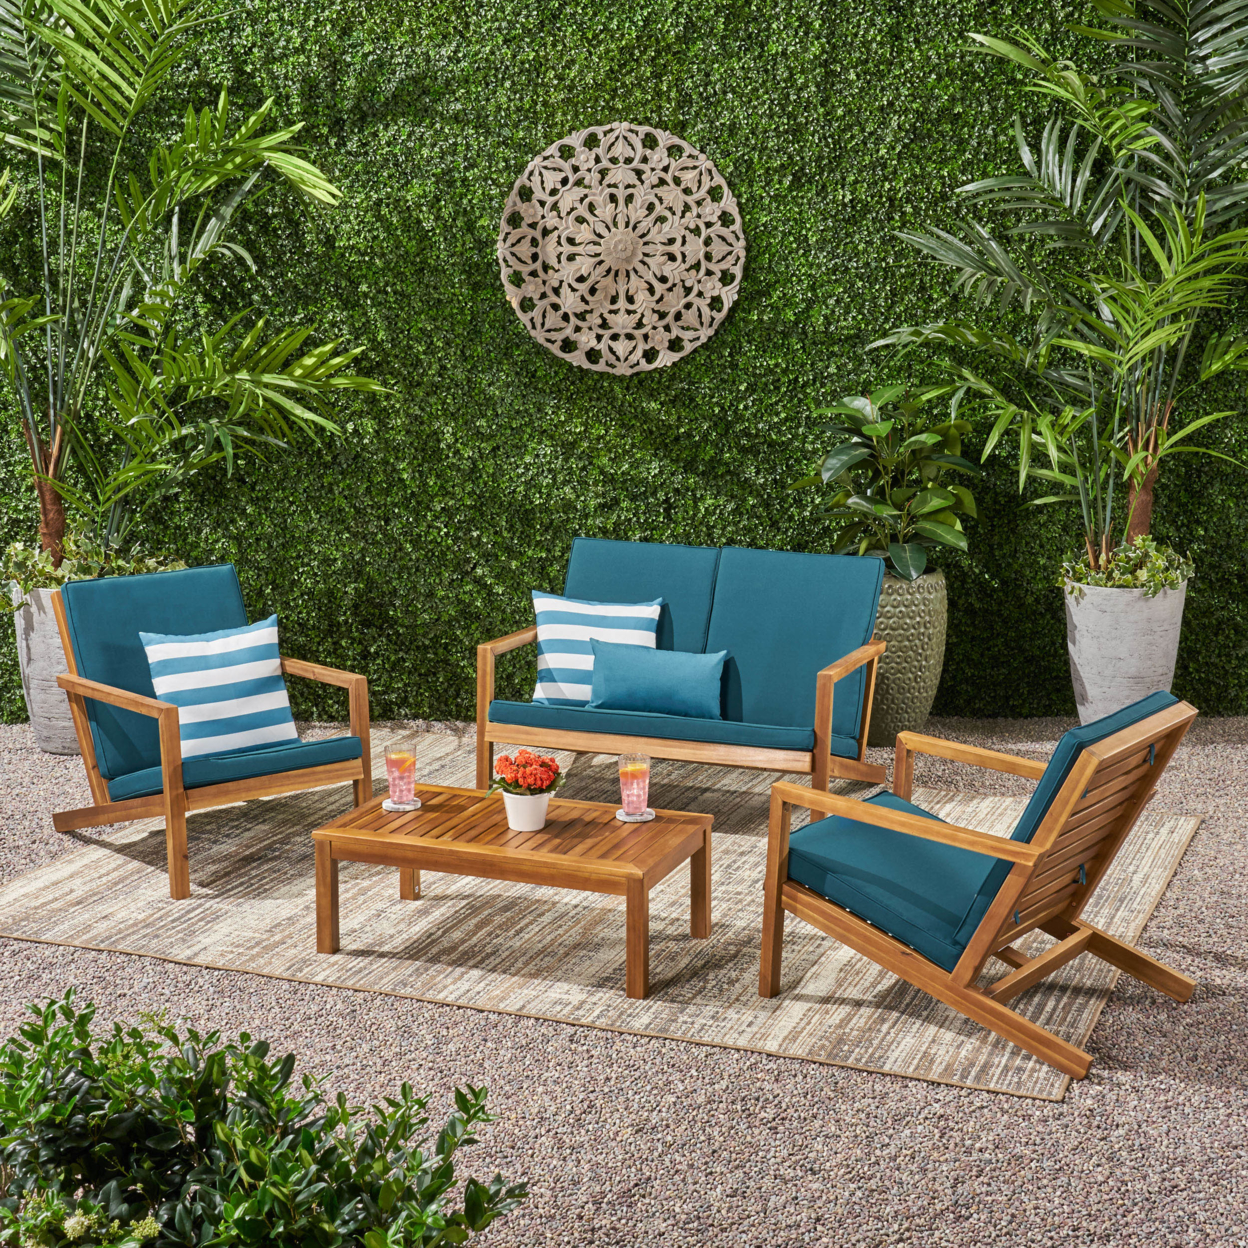 Camryn Outdoor 4 Seater Chat Set With Cushions - Brown Patina + Dark Teal